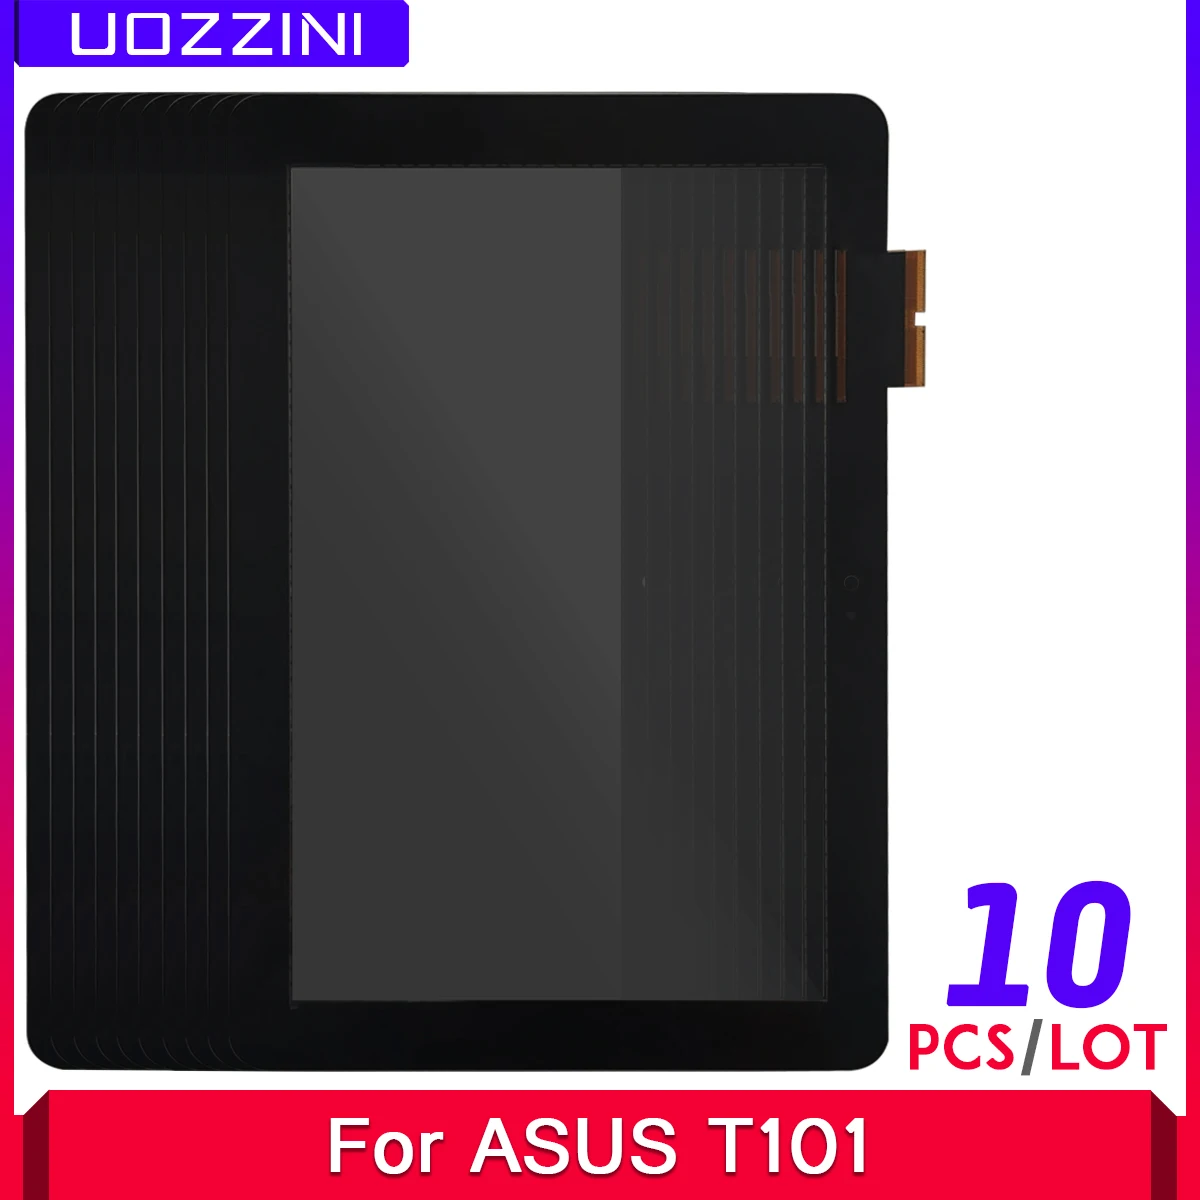 10 Pcs/Lots Touch For ASUS Transformer Book T101HA T101H T101 Touch Screen  Outer Glass Panel Digitizer Monitor Replacement|Tablet LCDs  Panels| -  AliExpress